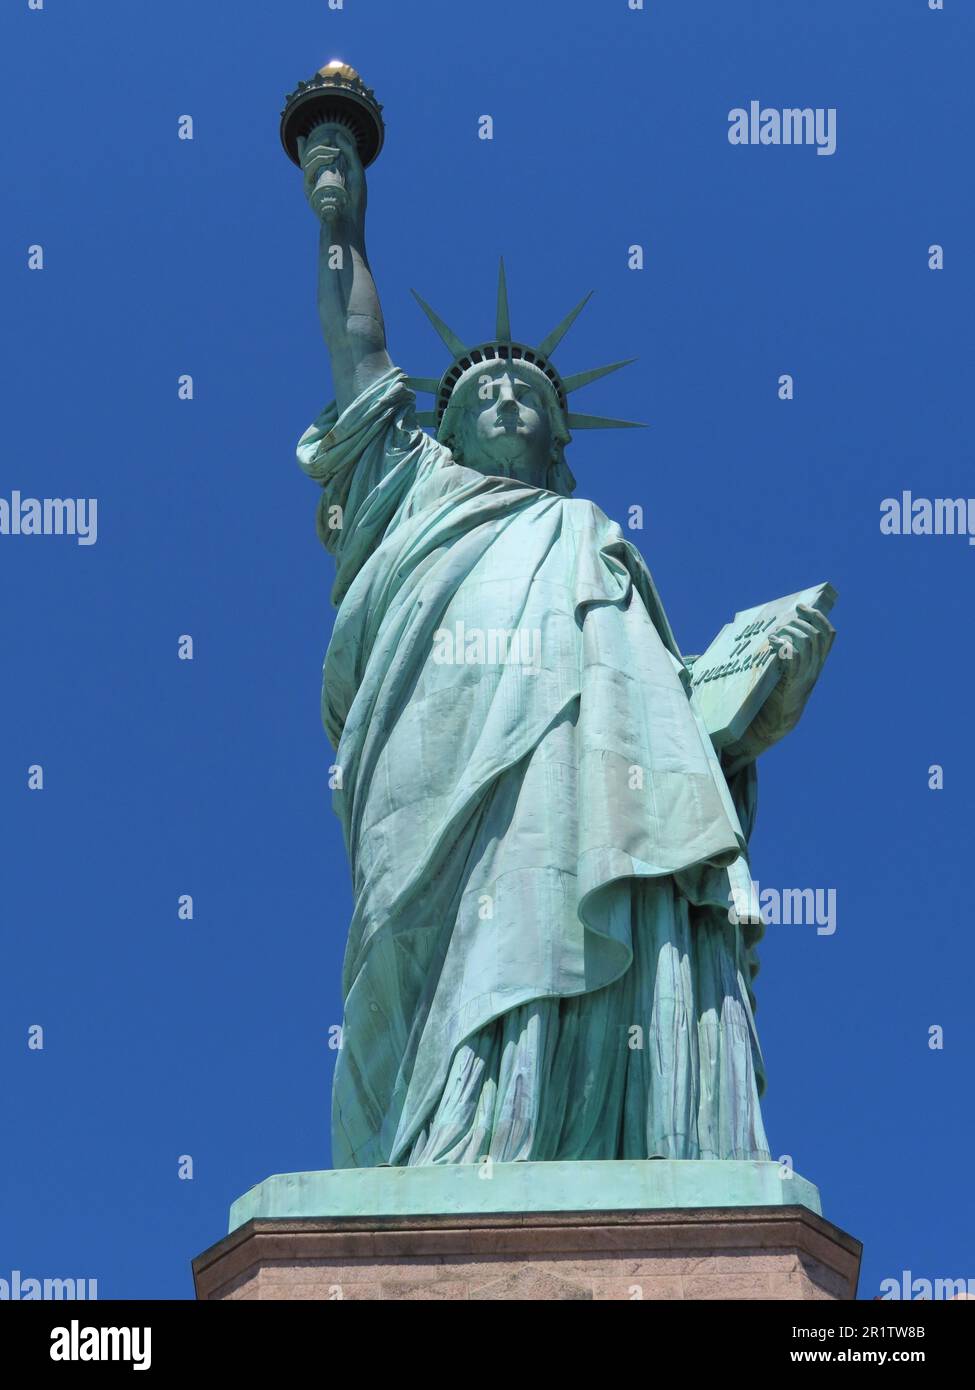 The Statue of Liberty in New York, USA Stock Photo